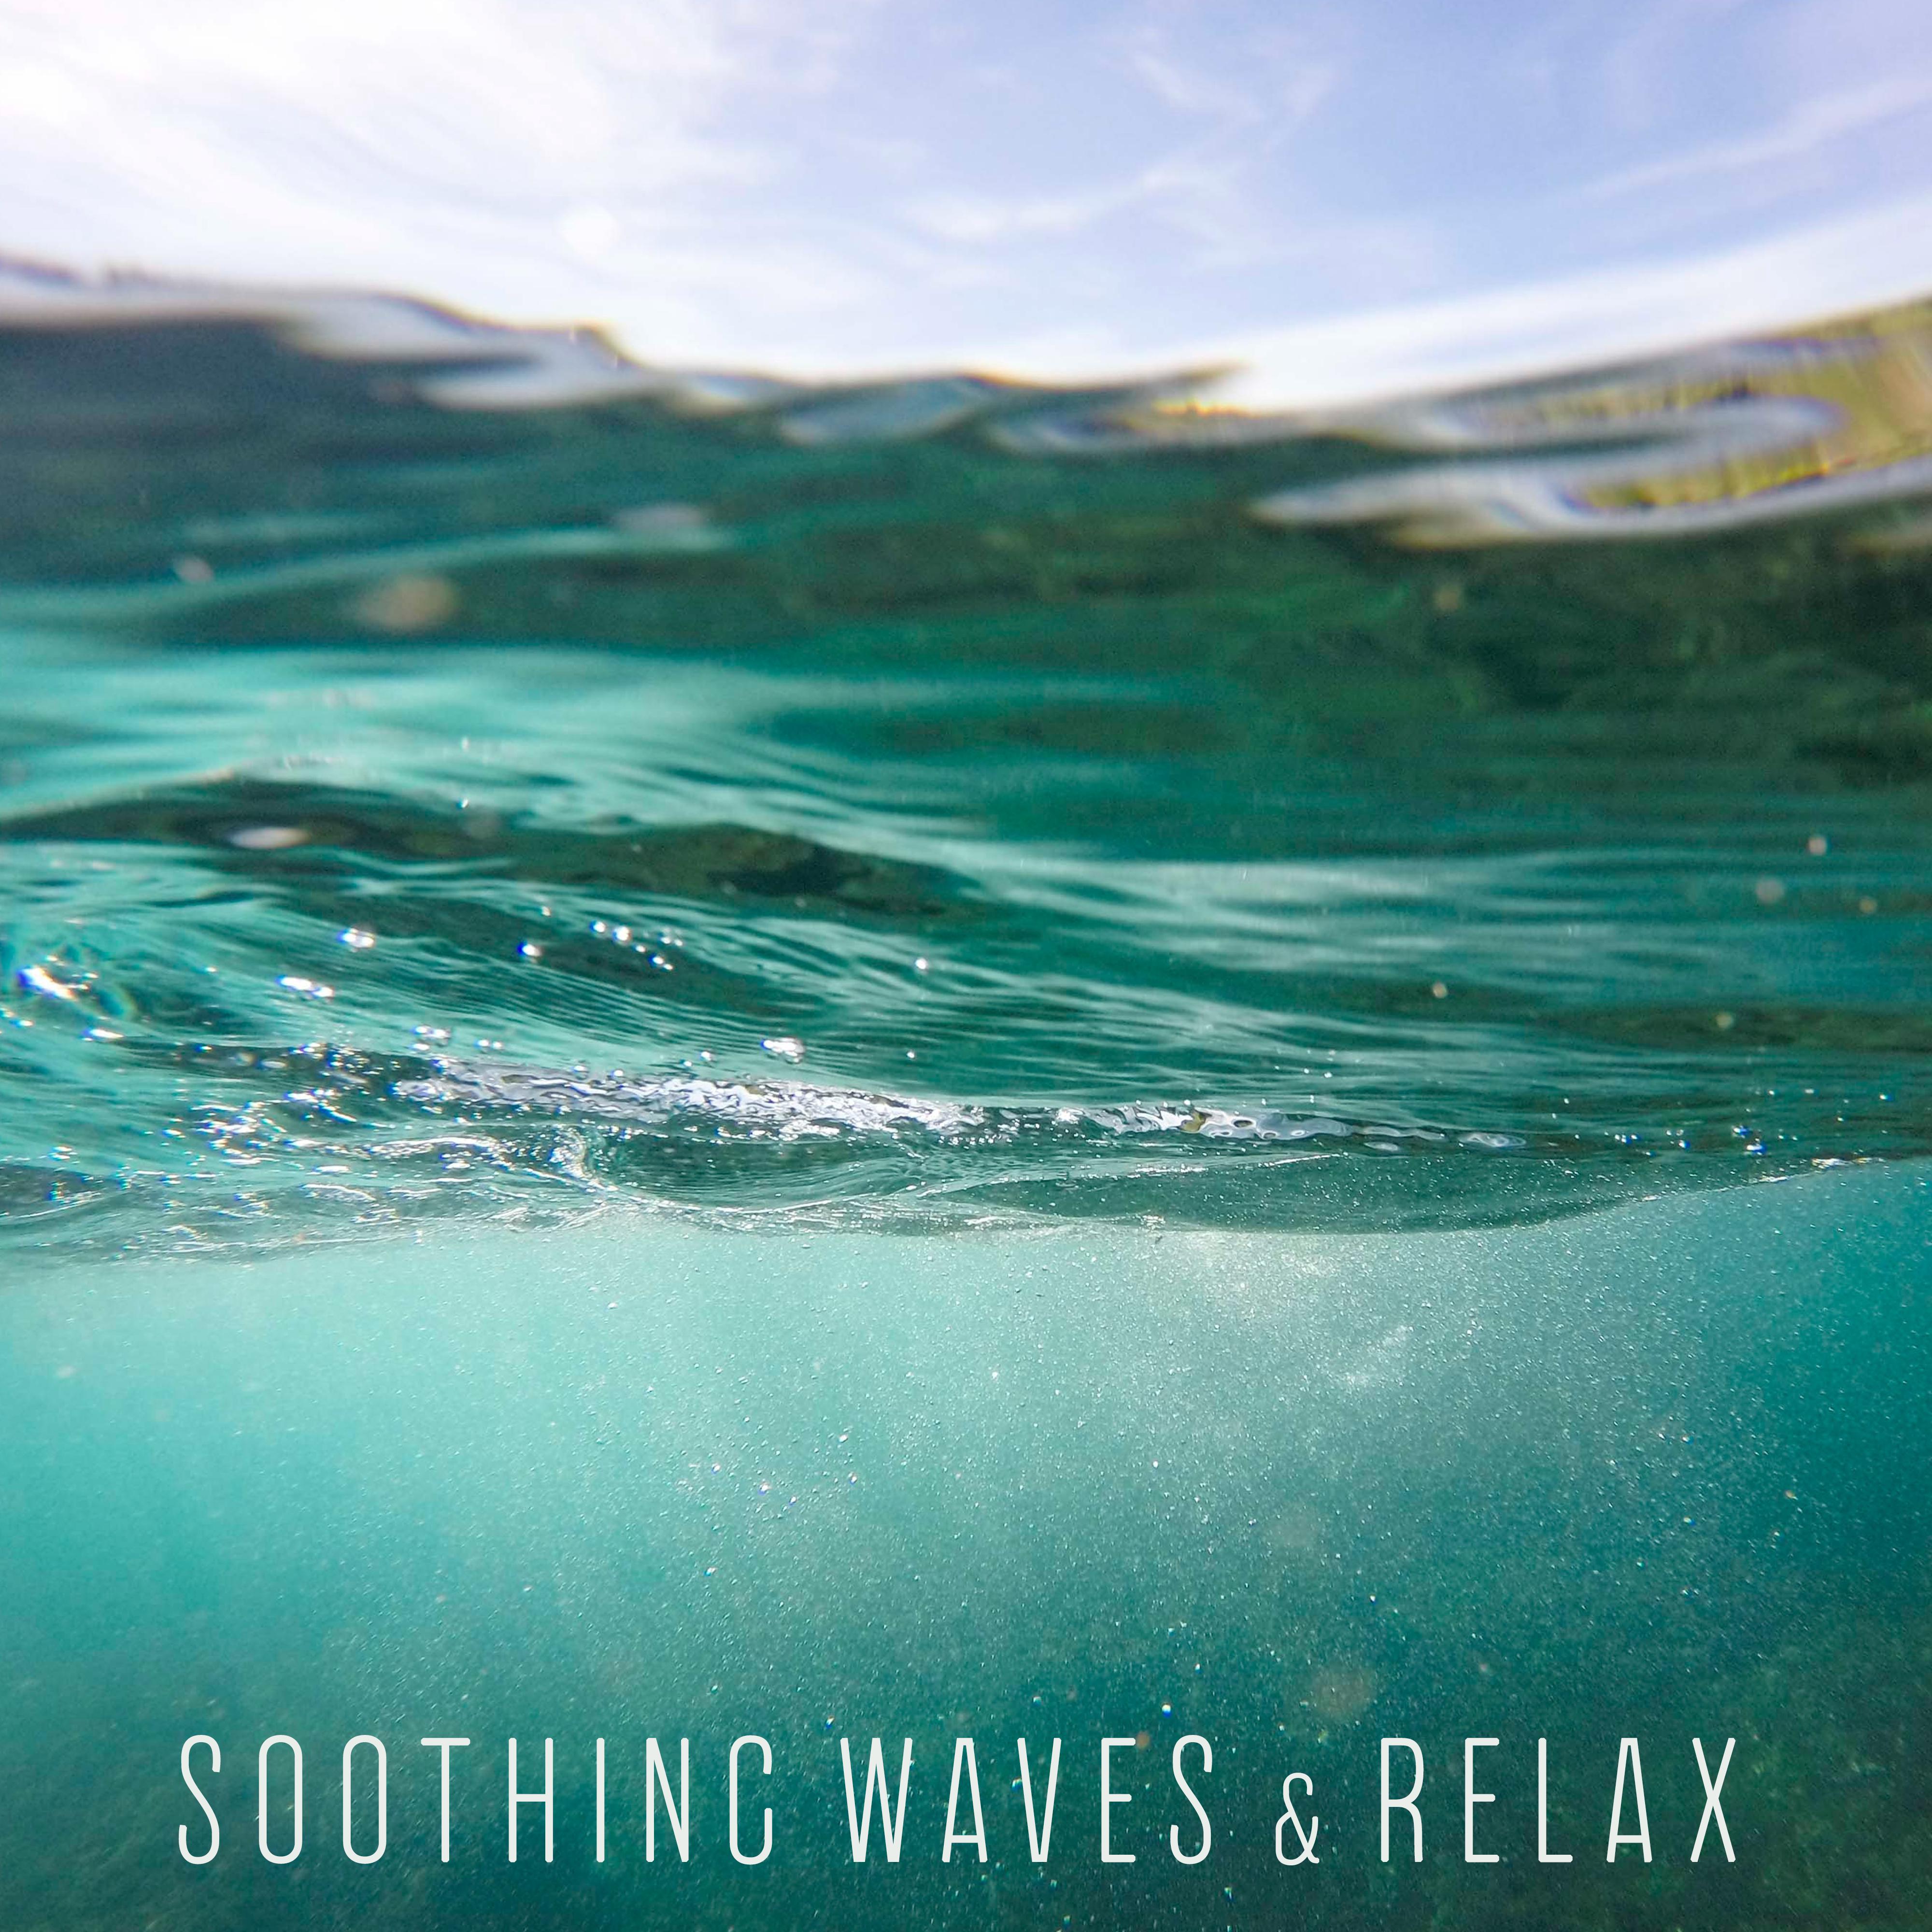 Soothing Waves & Relax